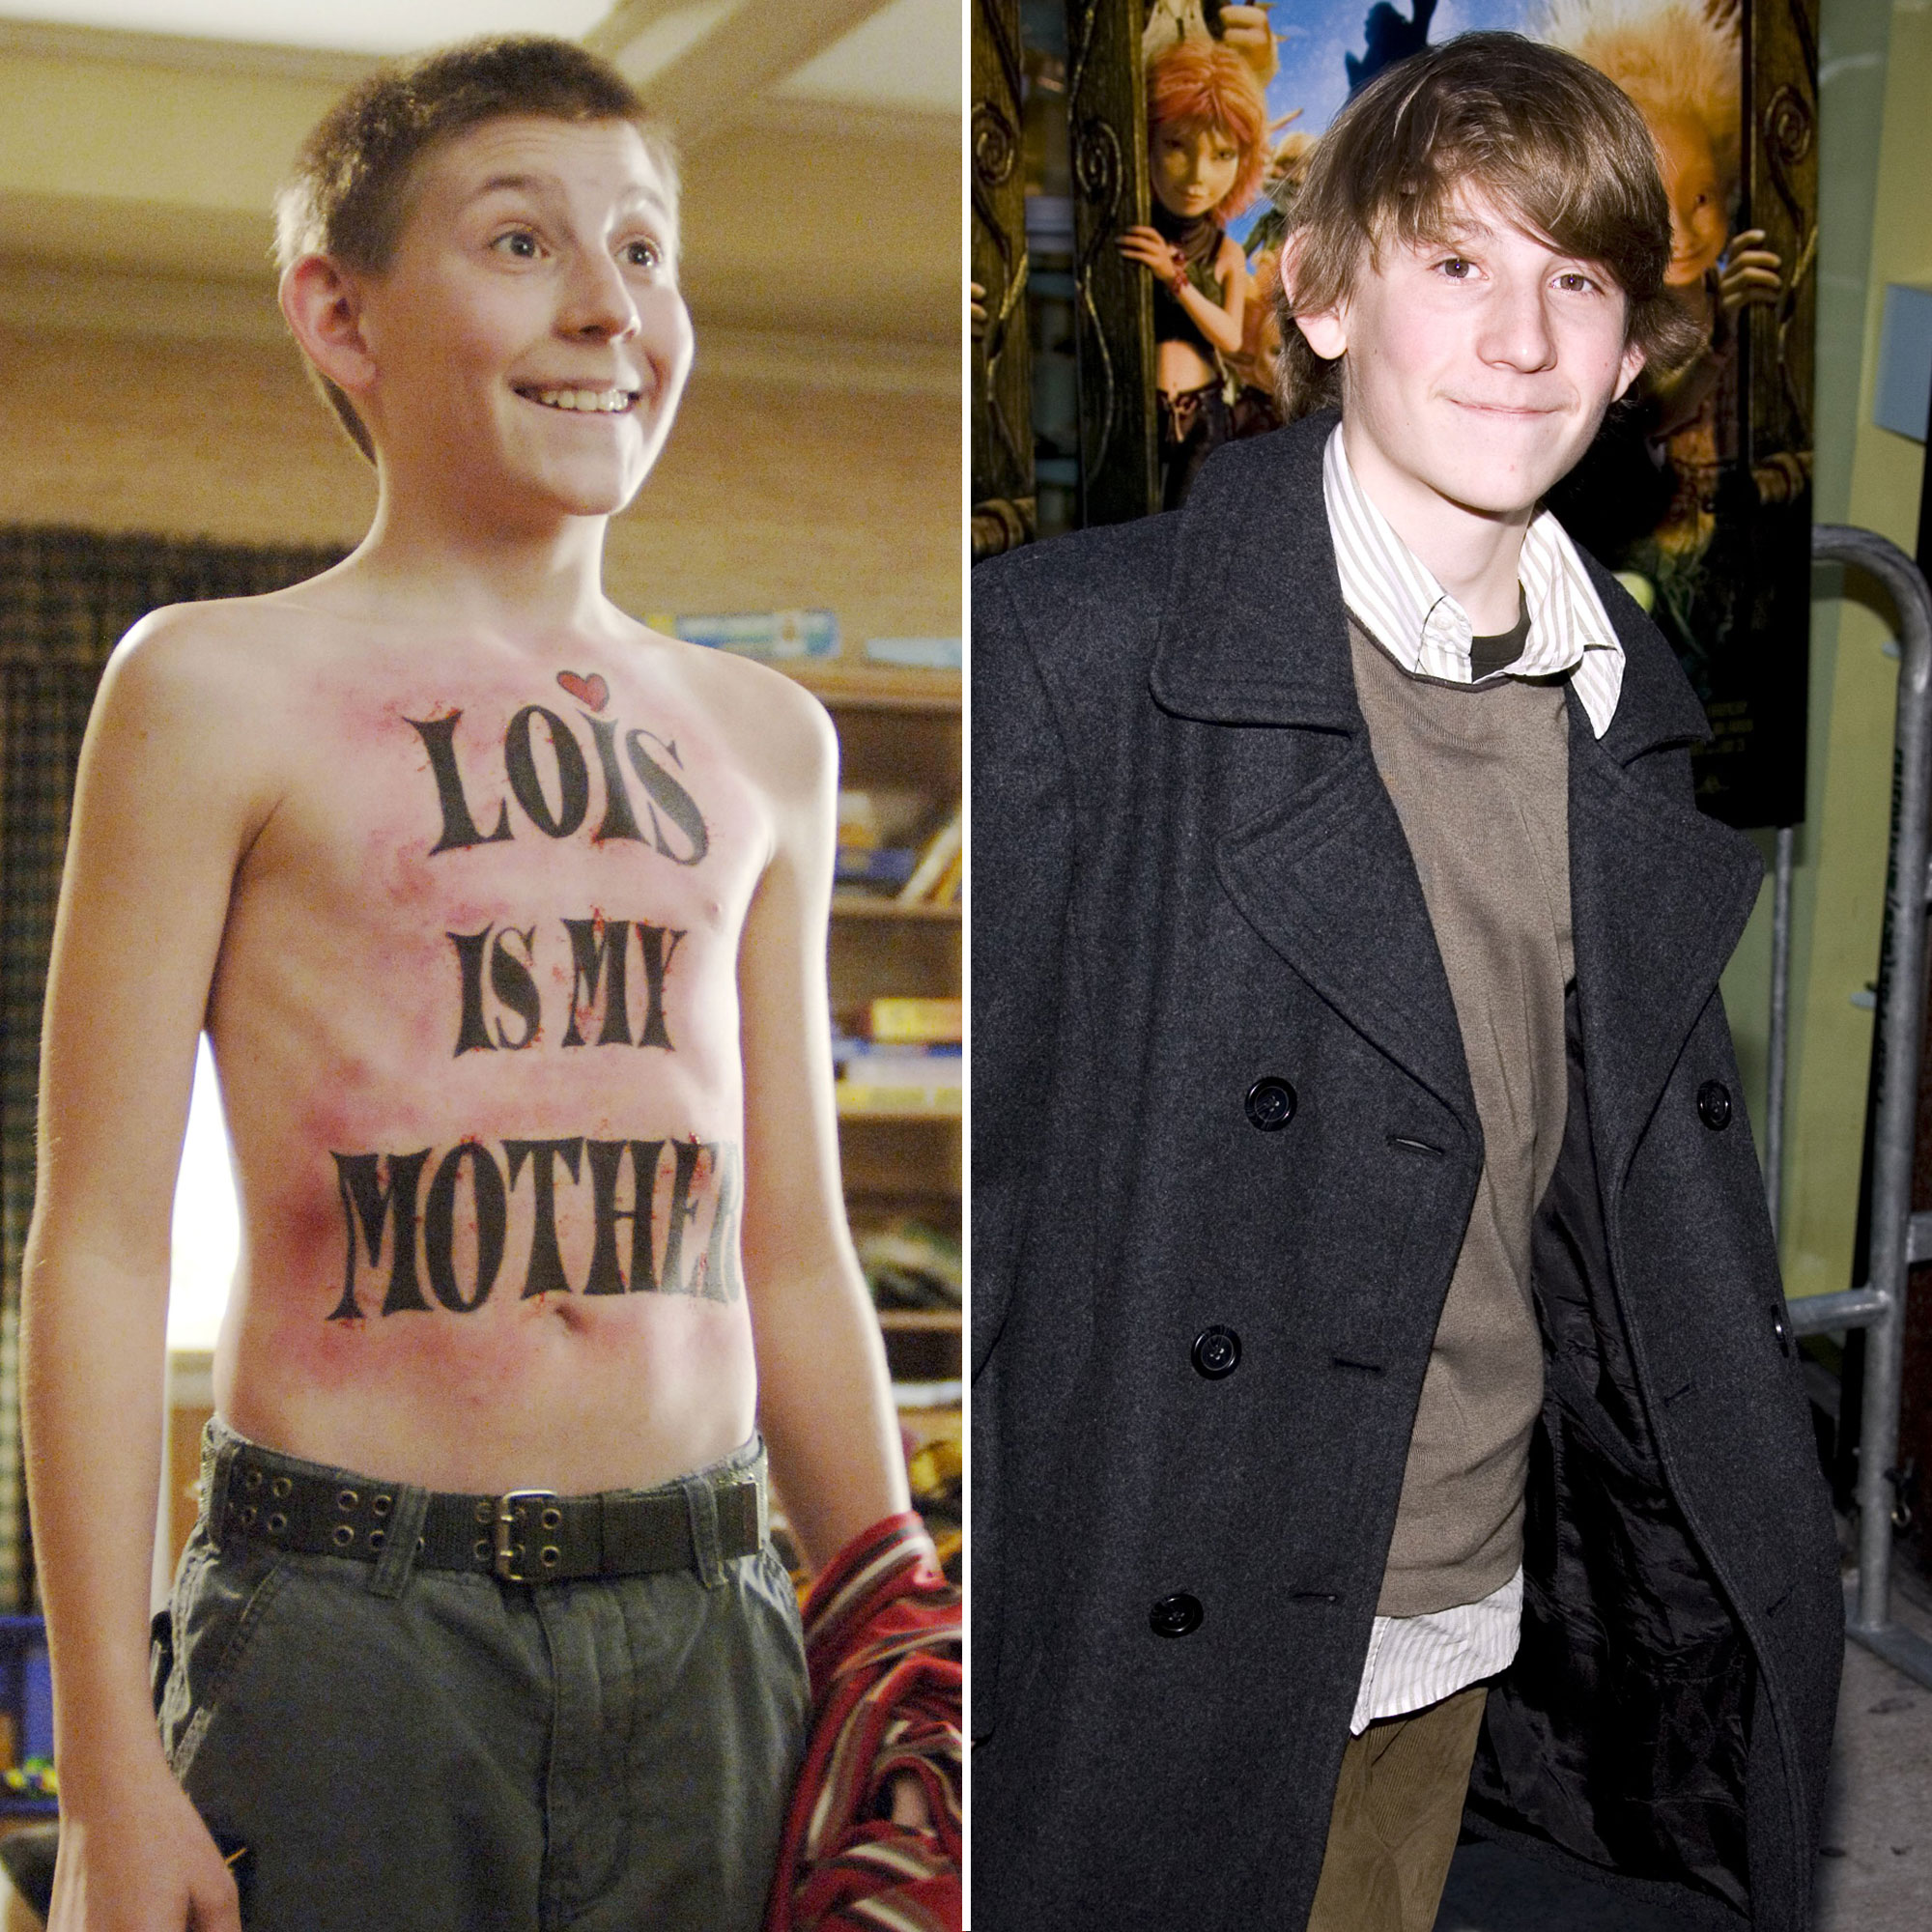 Malcolm in the Middle' Cast: Where Are They Now?